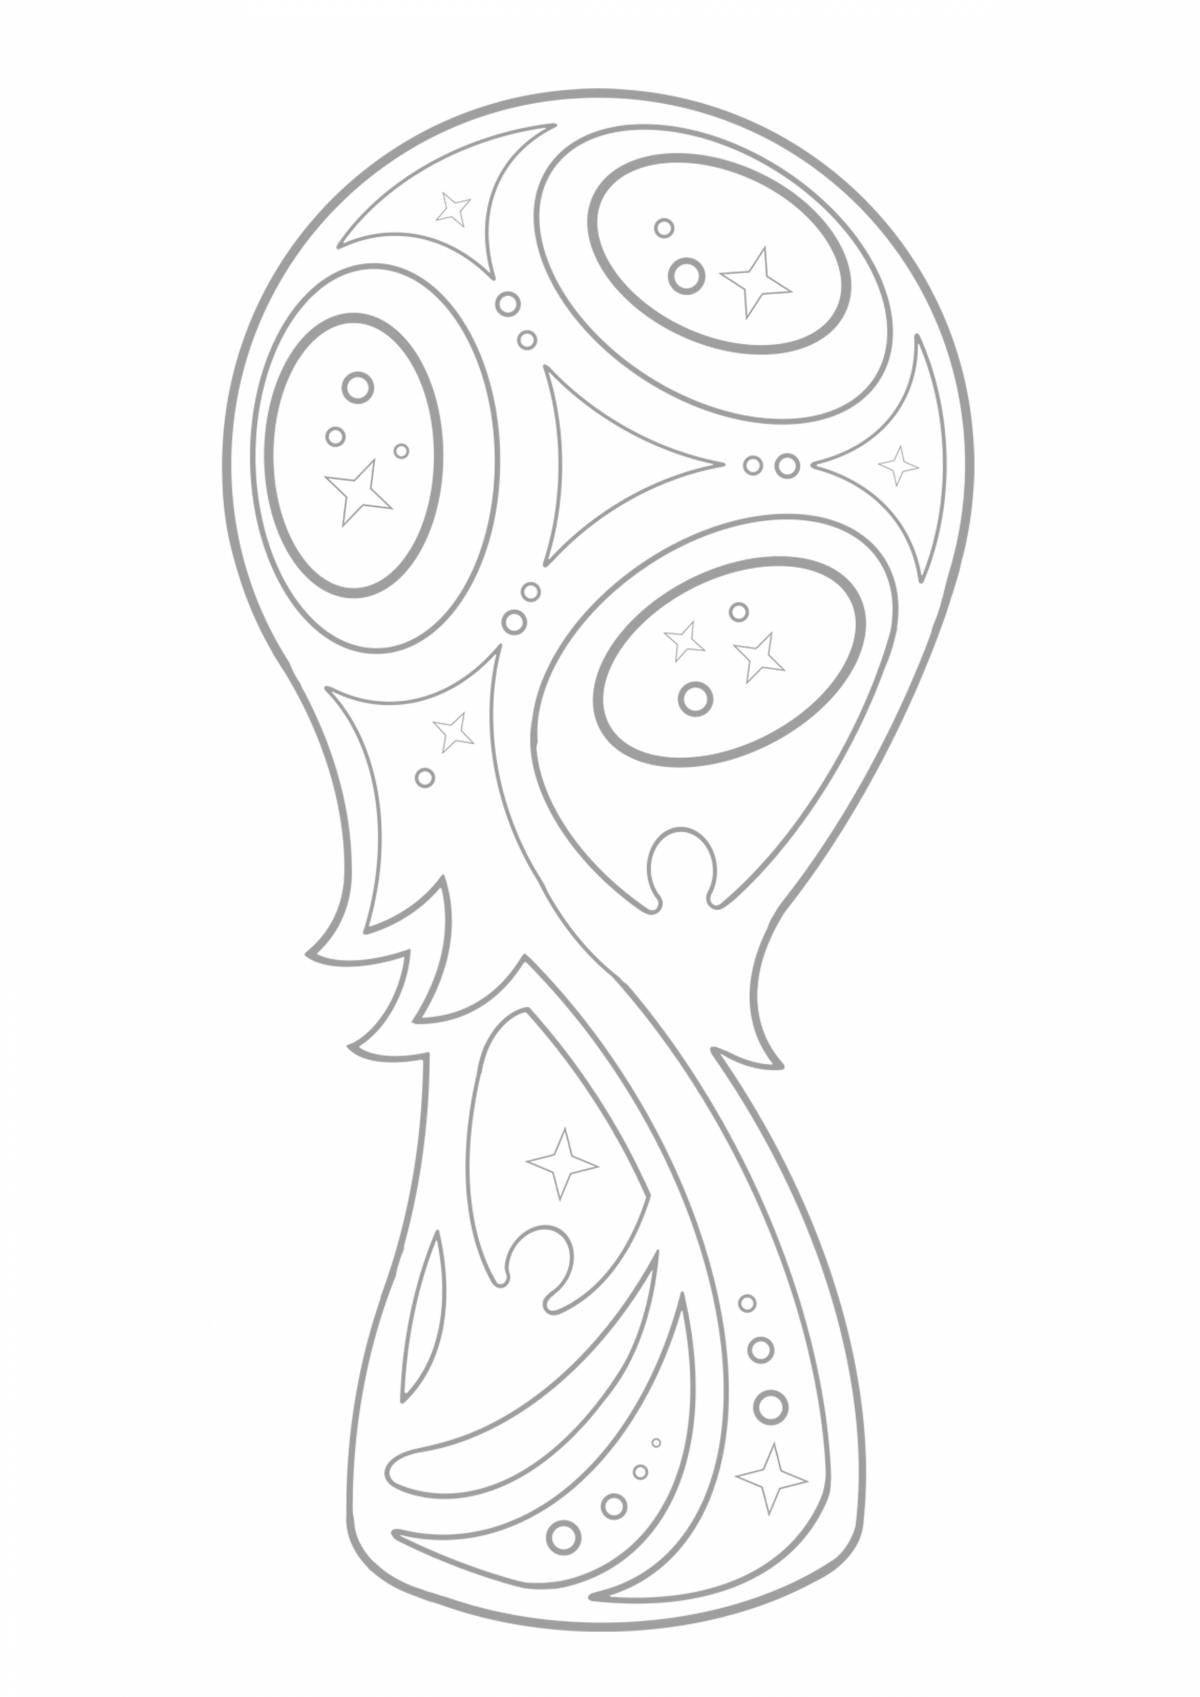 Coloring page of the World Cup